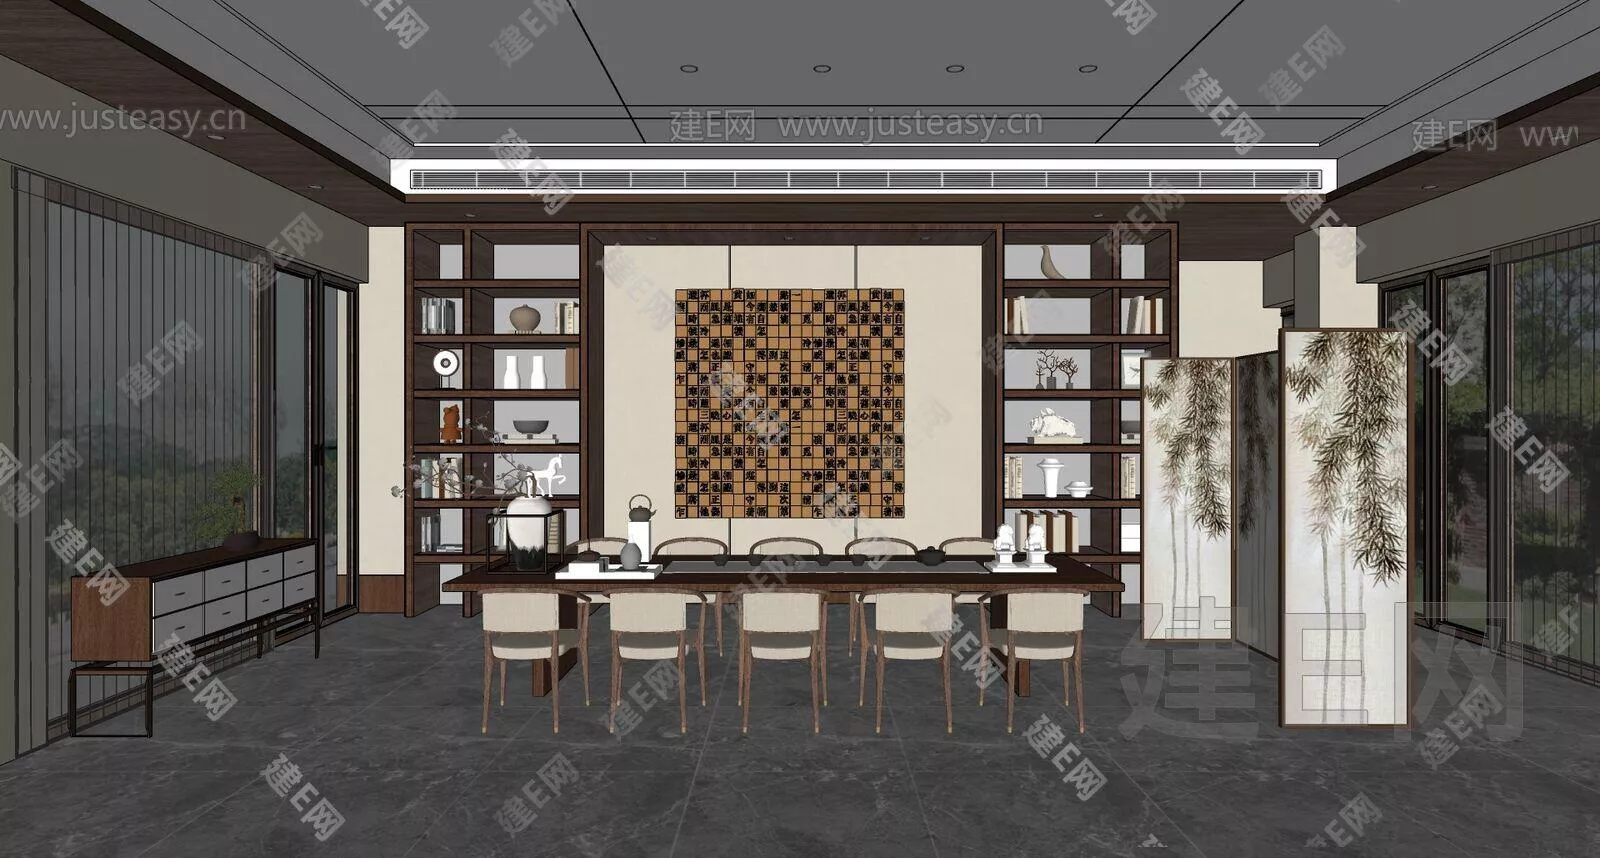 CHINESE TEAROOM - SKETCHUP 3D SCENE - ENSCAPE - 107233899